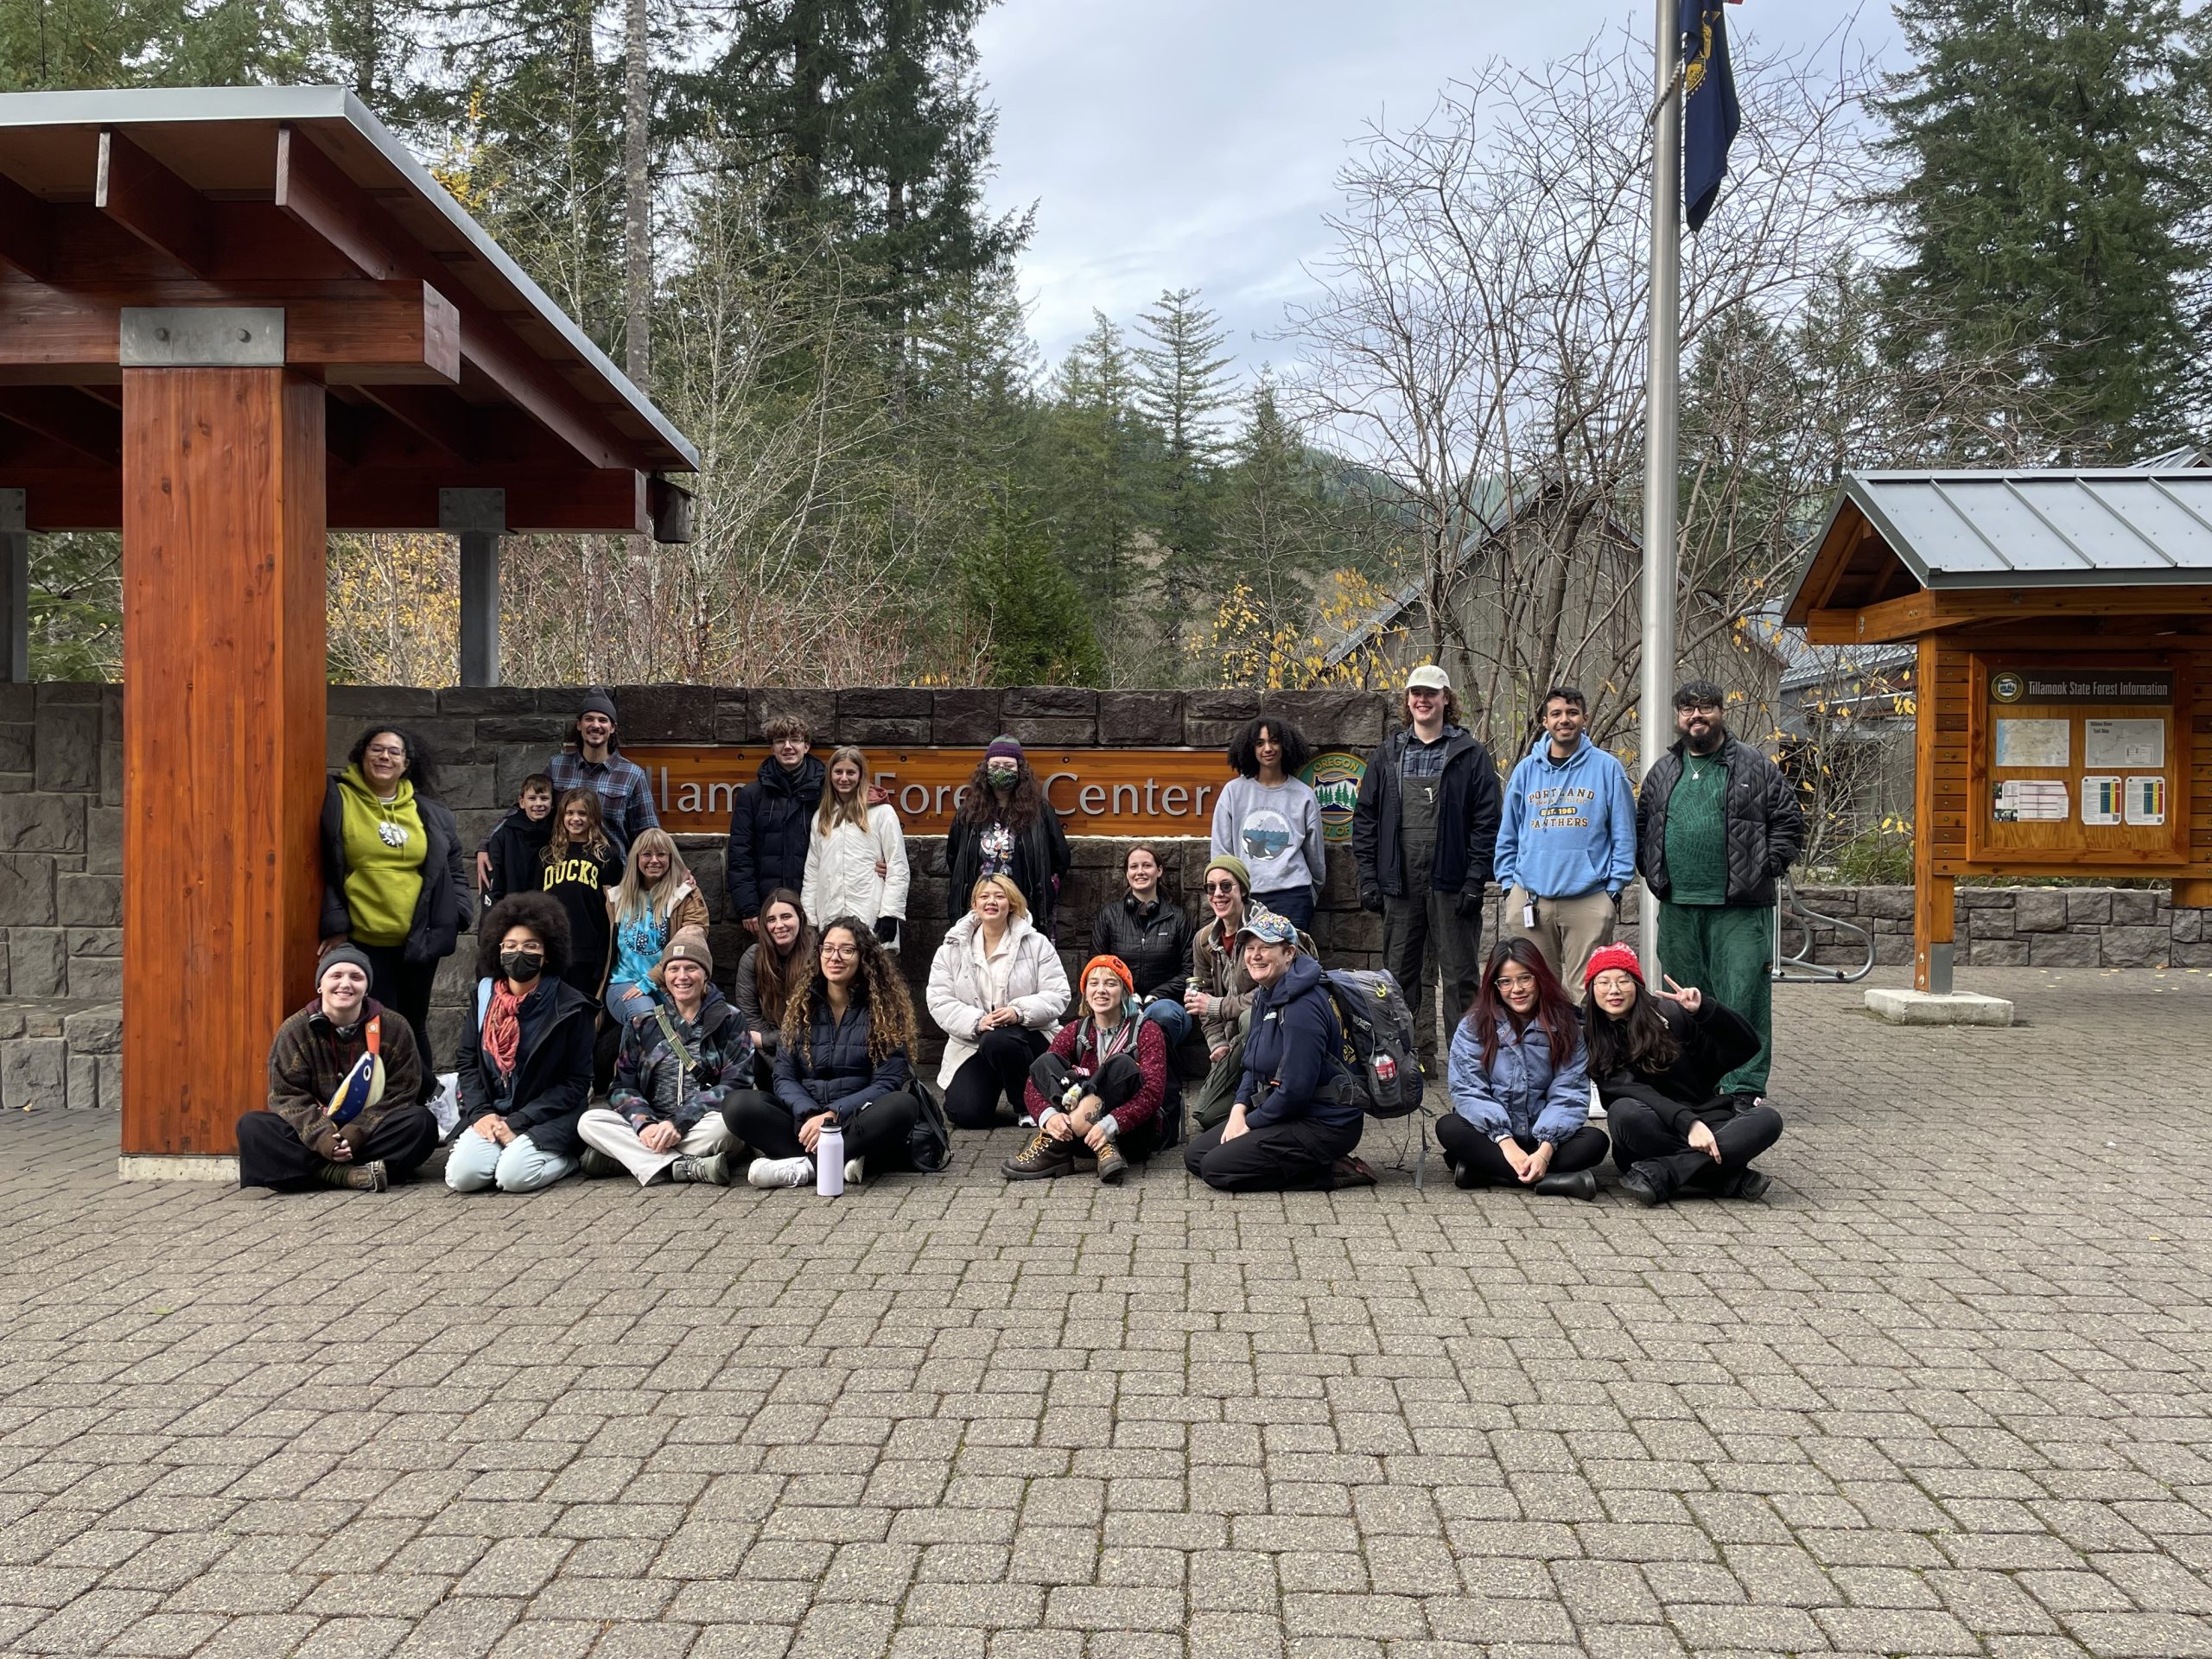 A group of PCC students, staff, and friends and family members are grouped in front of a wooden sign that says 'Tillamook Forest Center'. Some are sitting, others are standing, all have smiles on their faces as they look at the camera. 